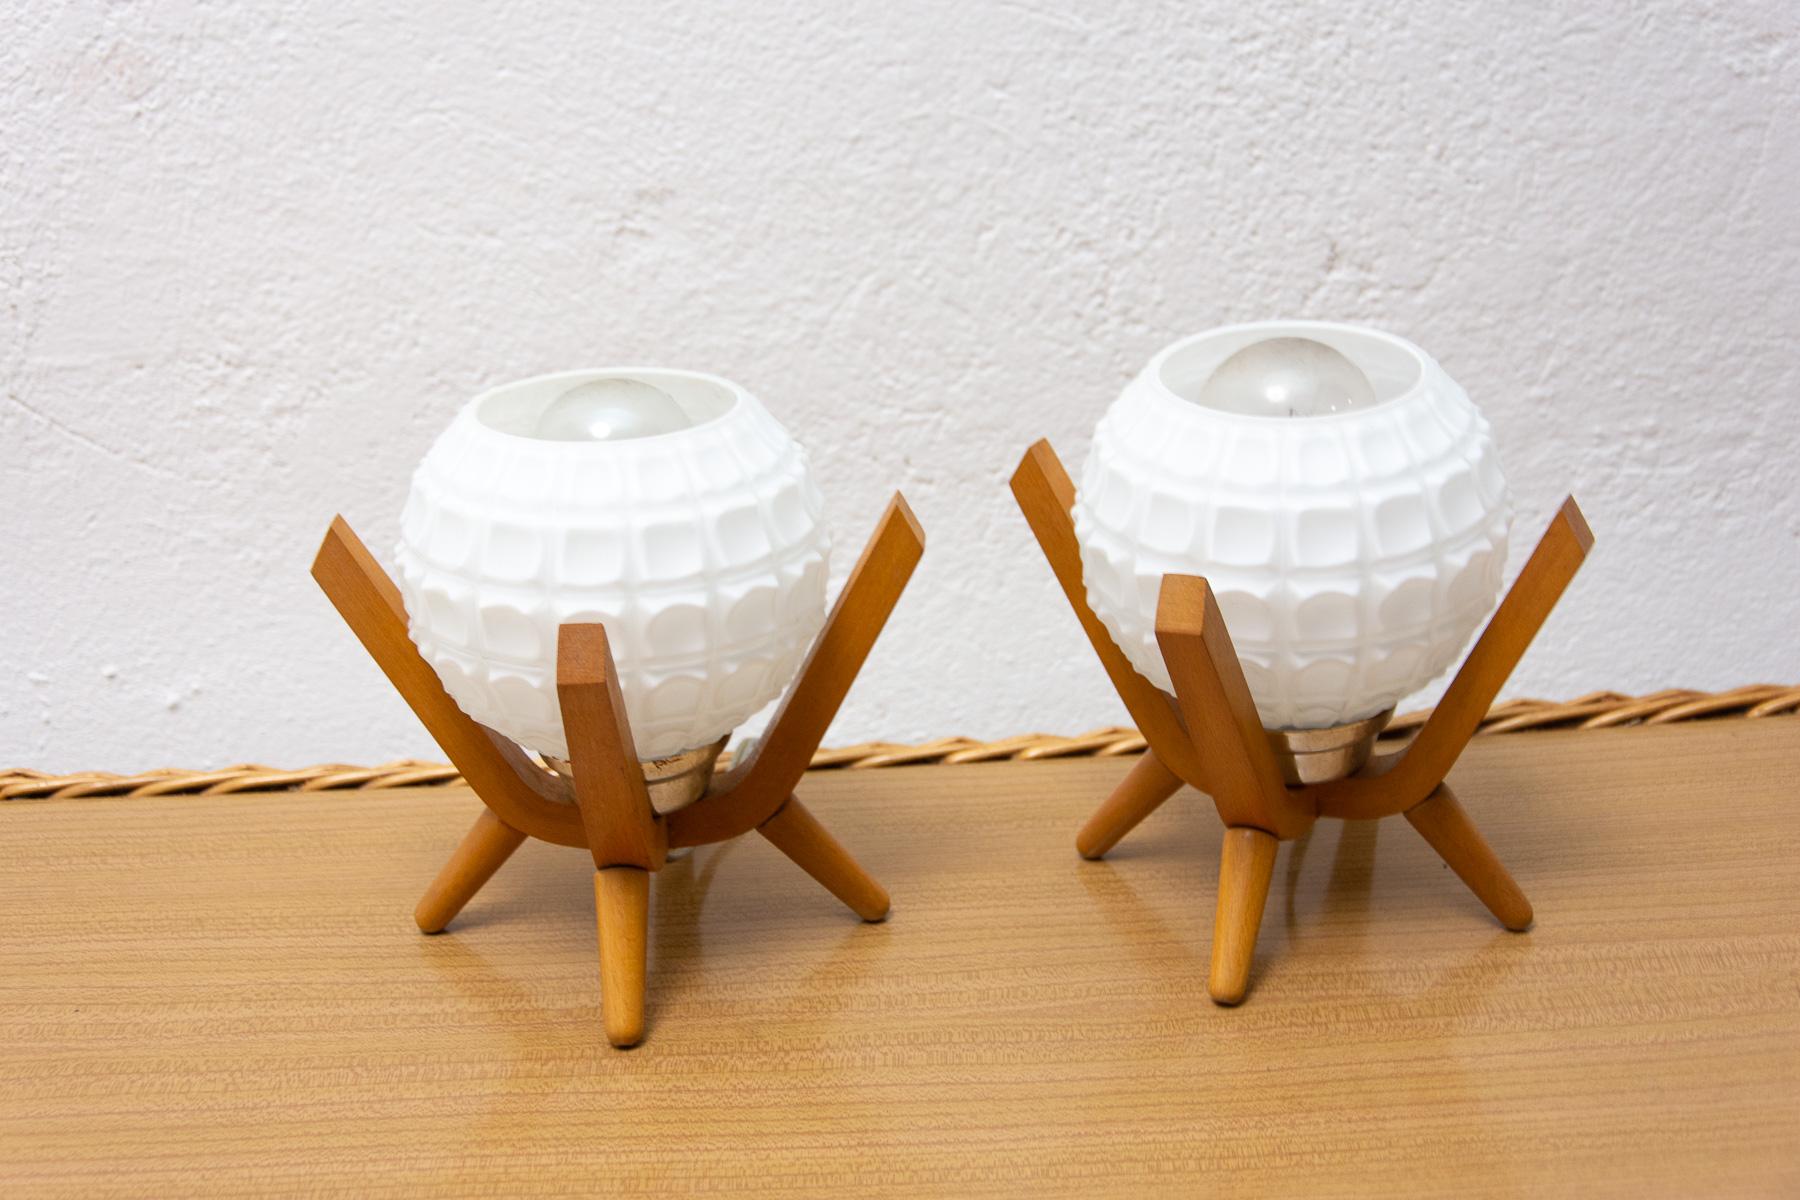 These mid century table lamps were made by the Czechoslovak company Drevo Humpolec in the 1960s.
The lamps have a wooden base and a glass shade.
It’s in very good Vintage condition, fully functional.

Measures: Height : 20 cm

Width : 20